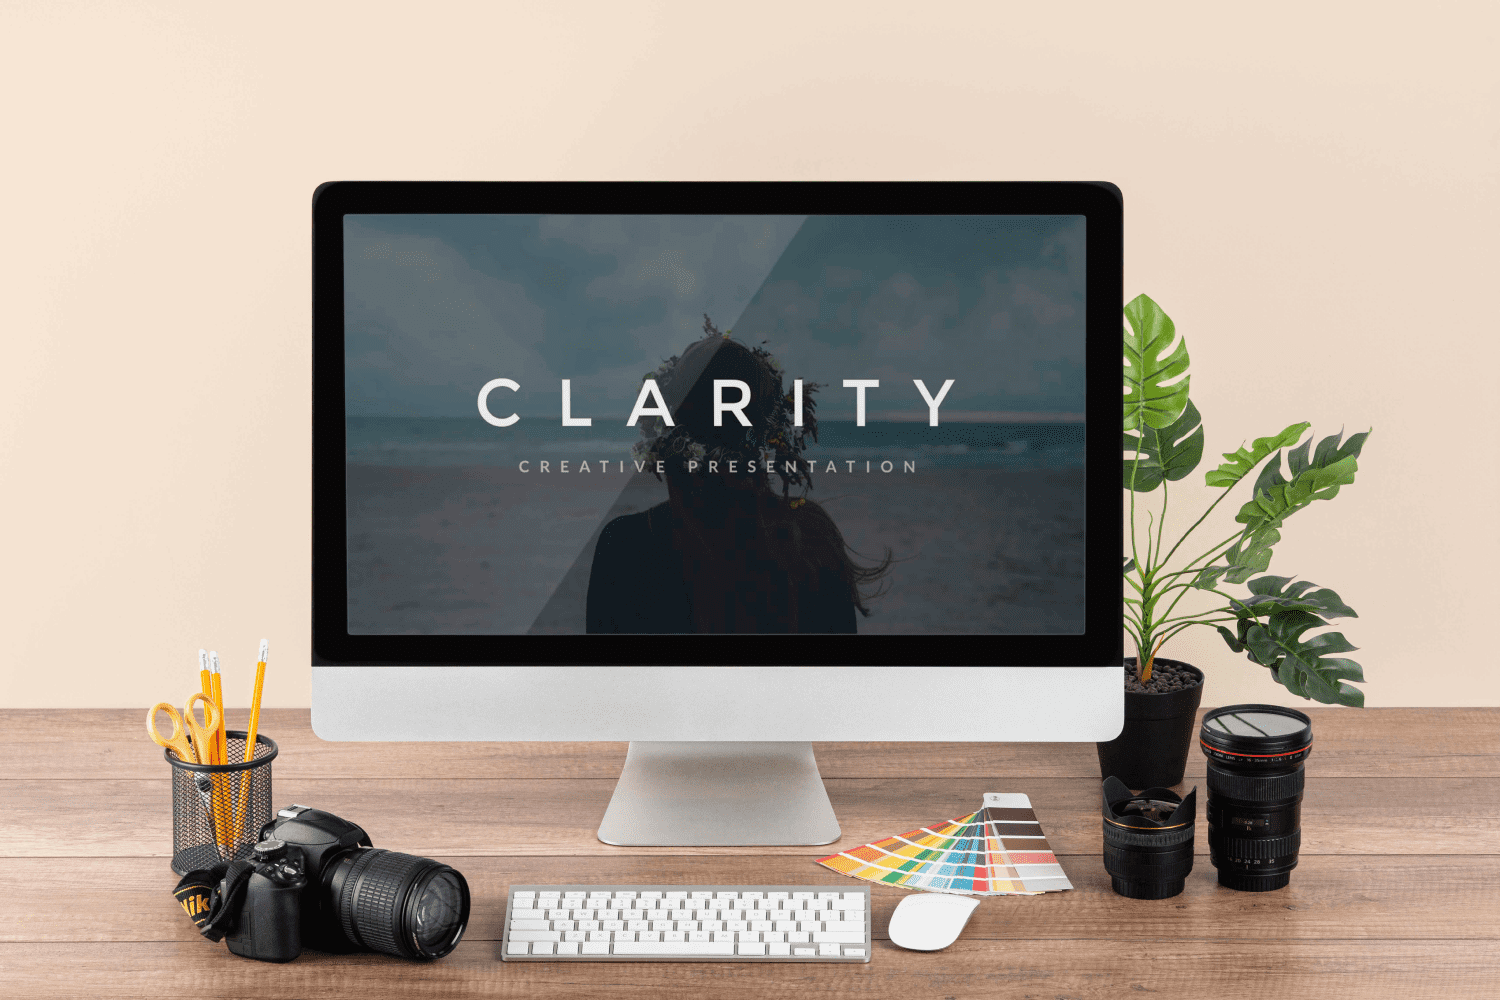 Clarity PowerPoint Template by MasterBundles Desktop preview mockup image.